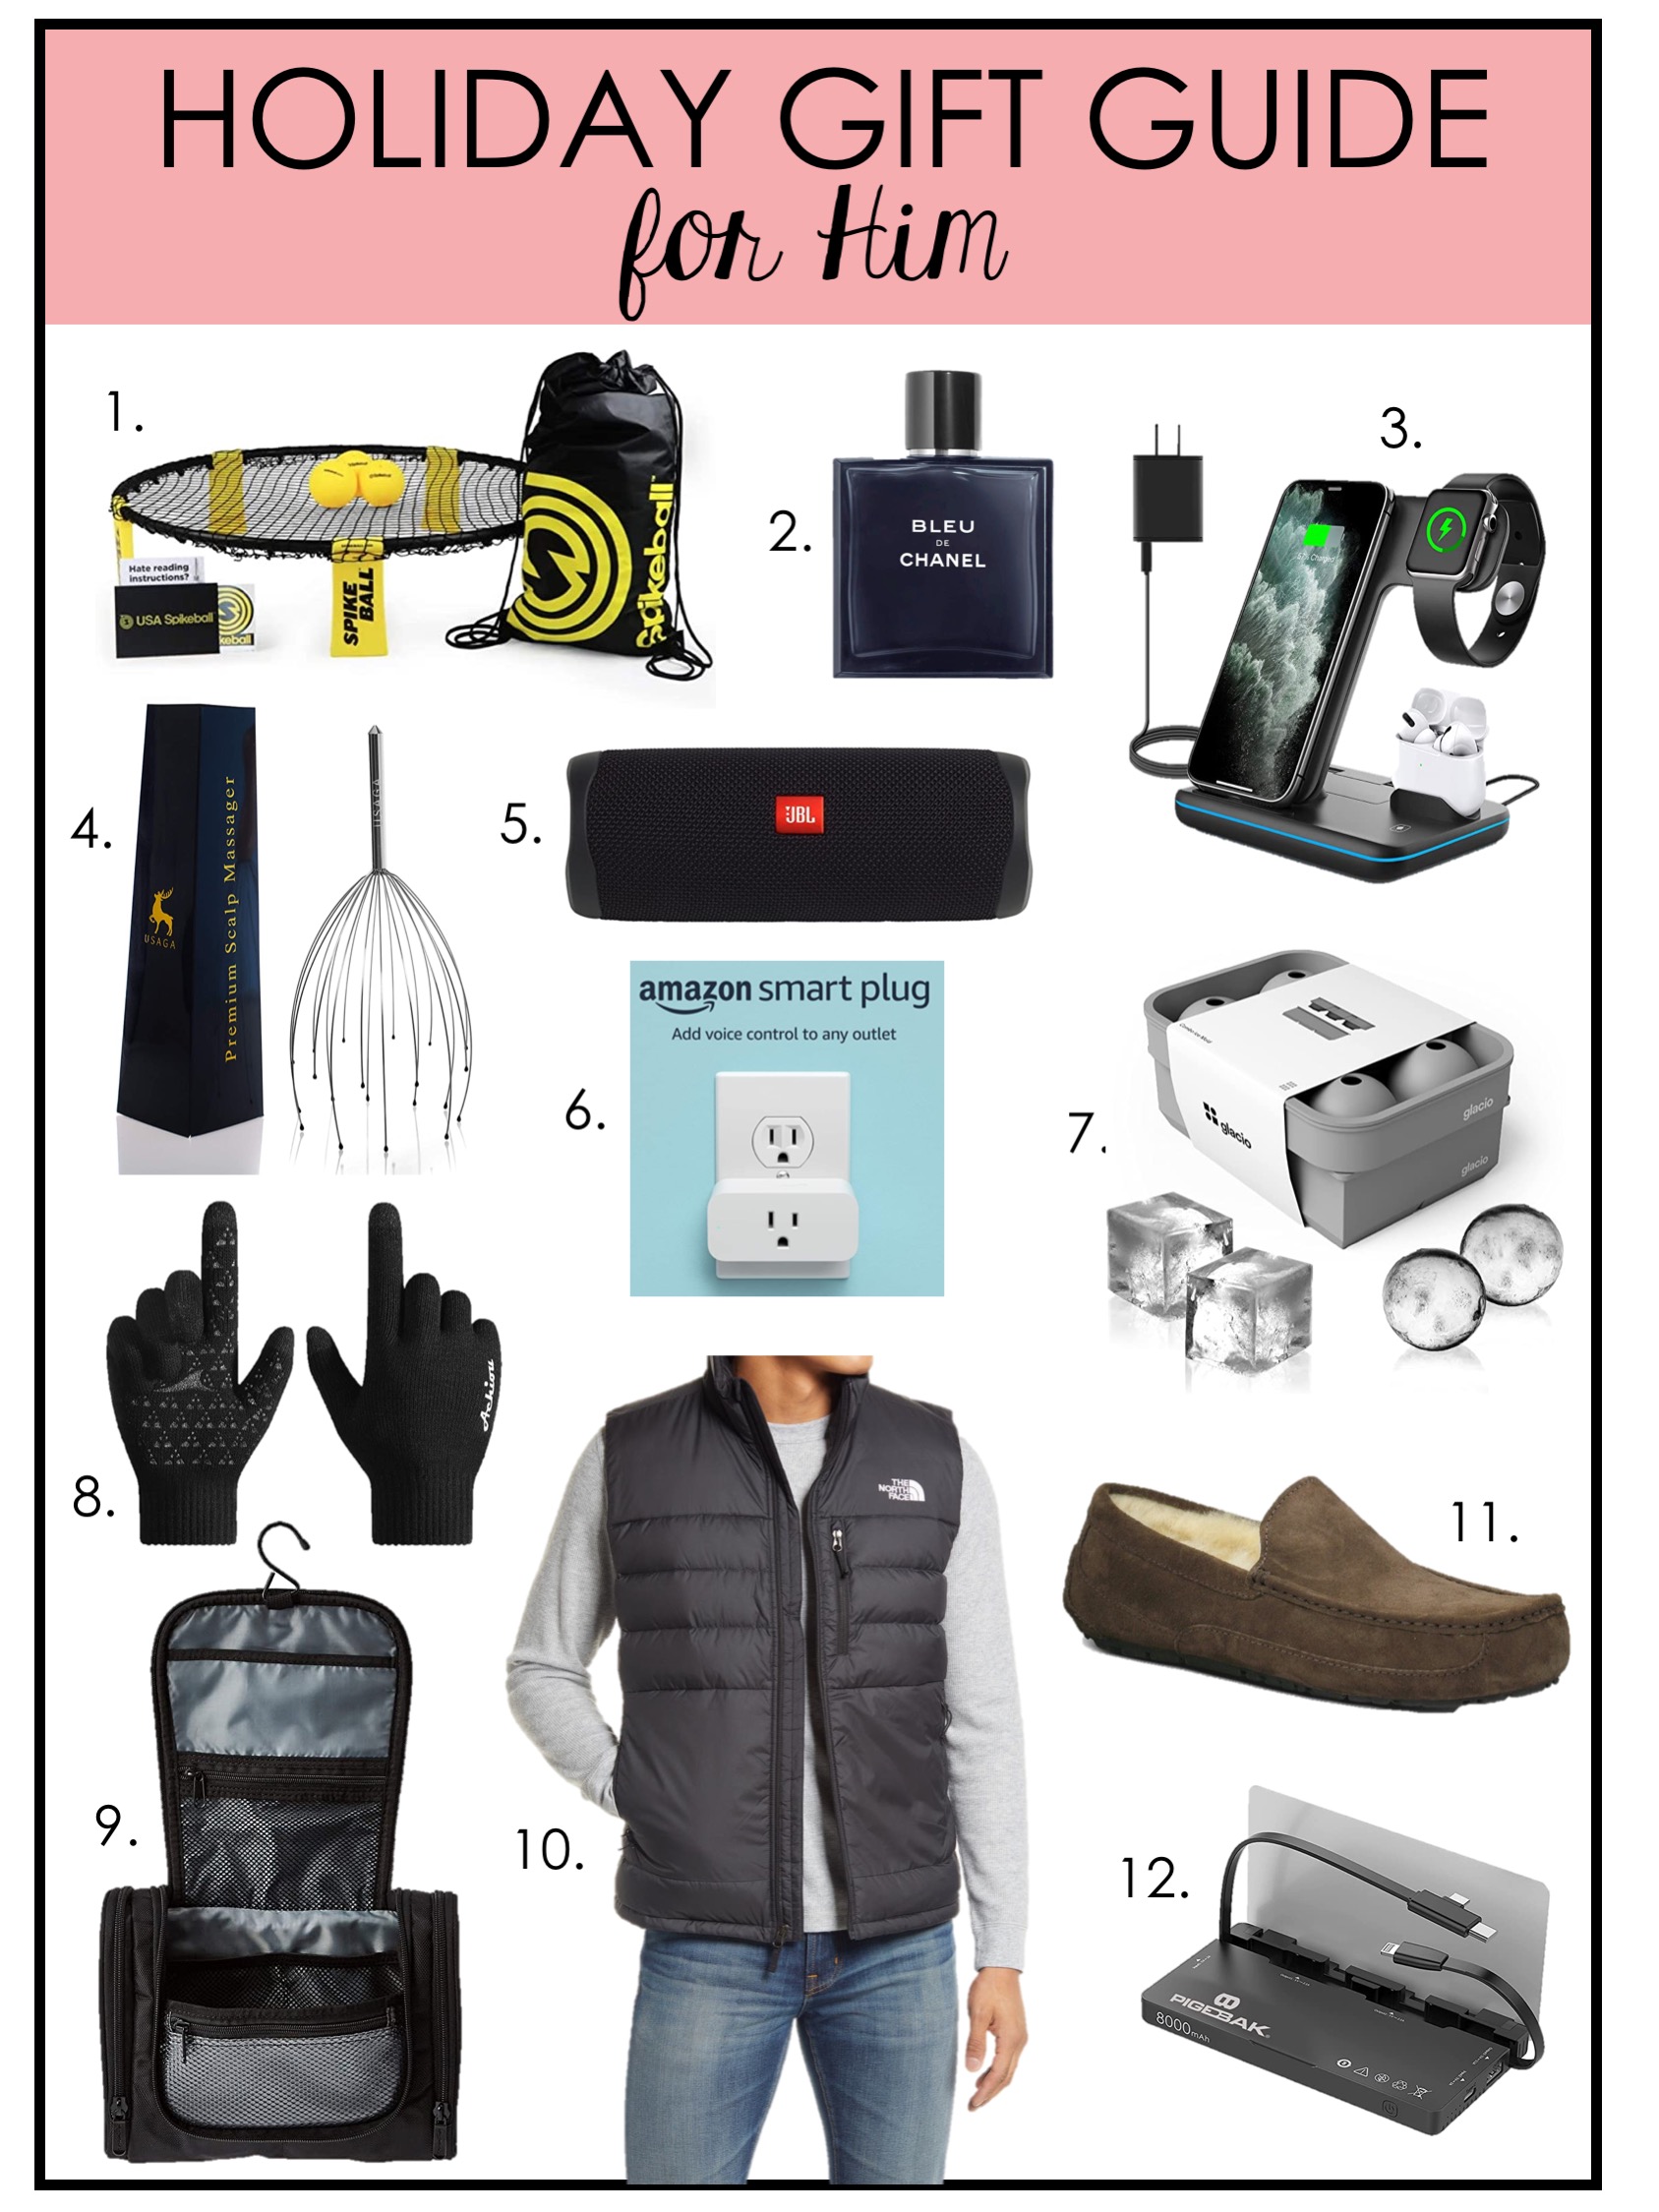 Gift Guide For Him - Husband, Dad, FIL, Brother